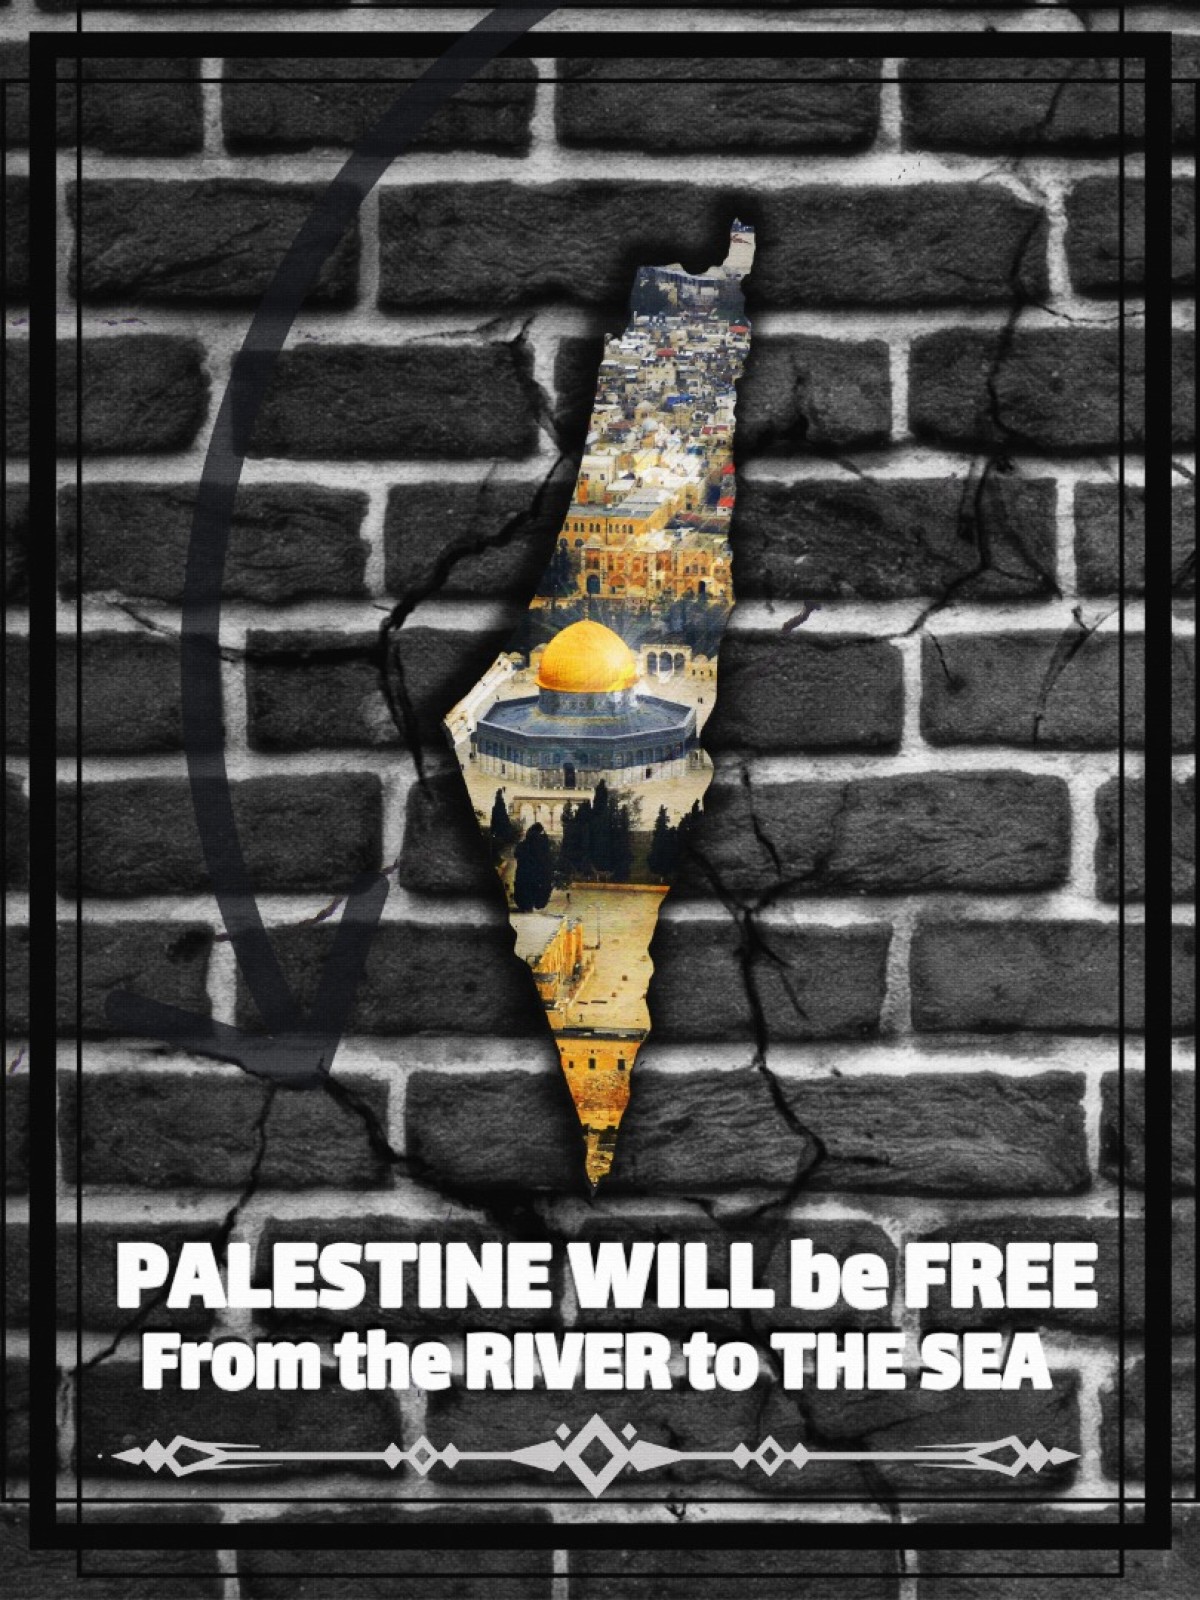 Palestine will be free from the river to the sea